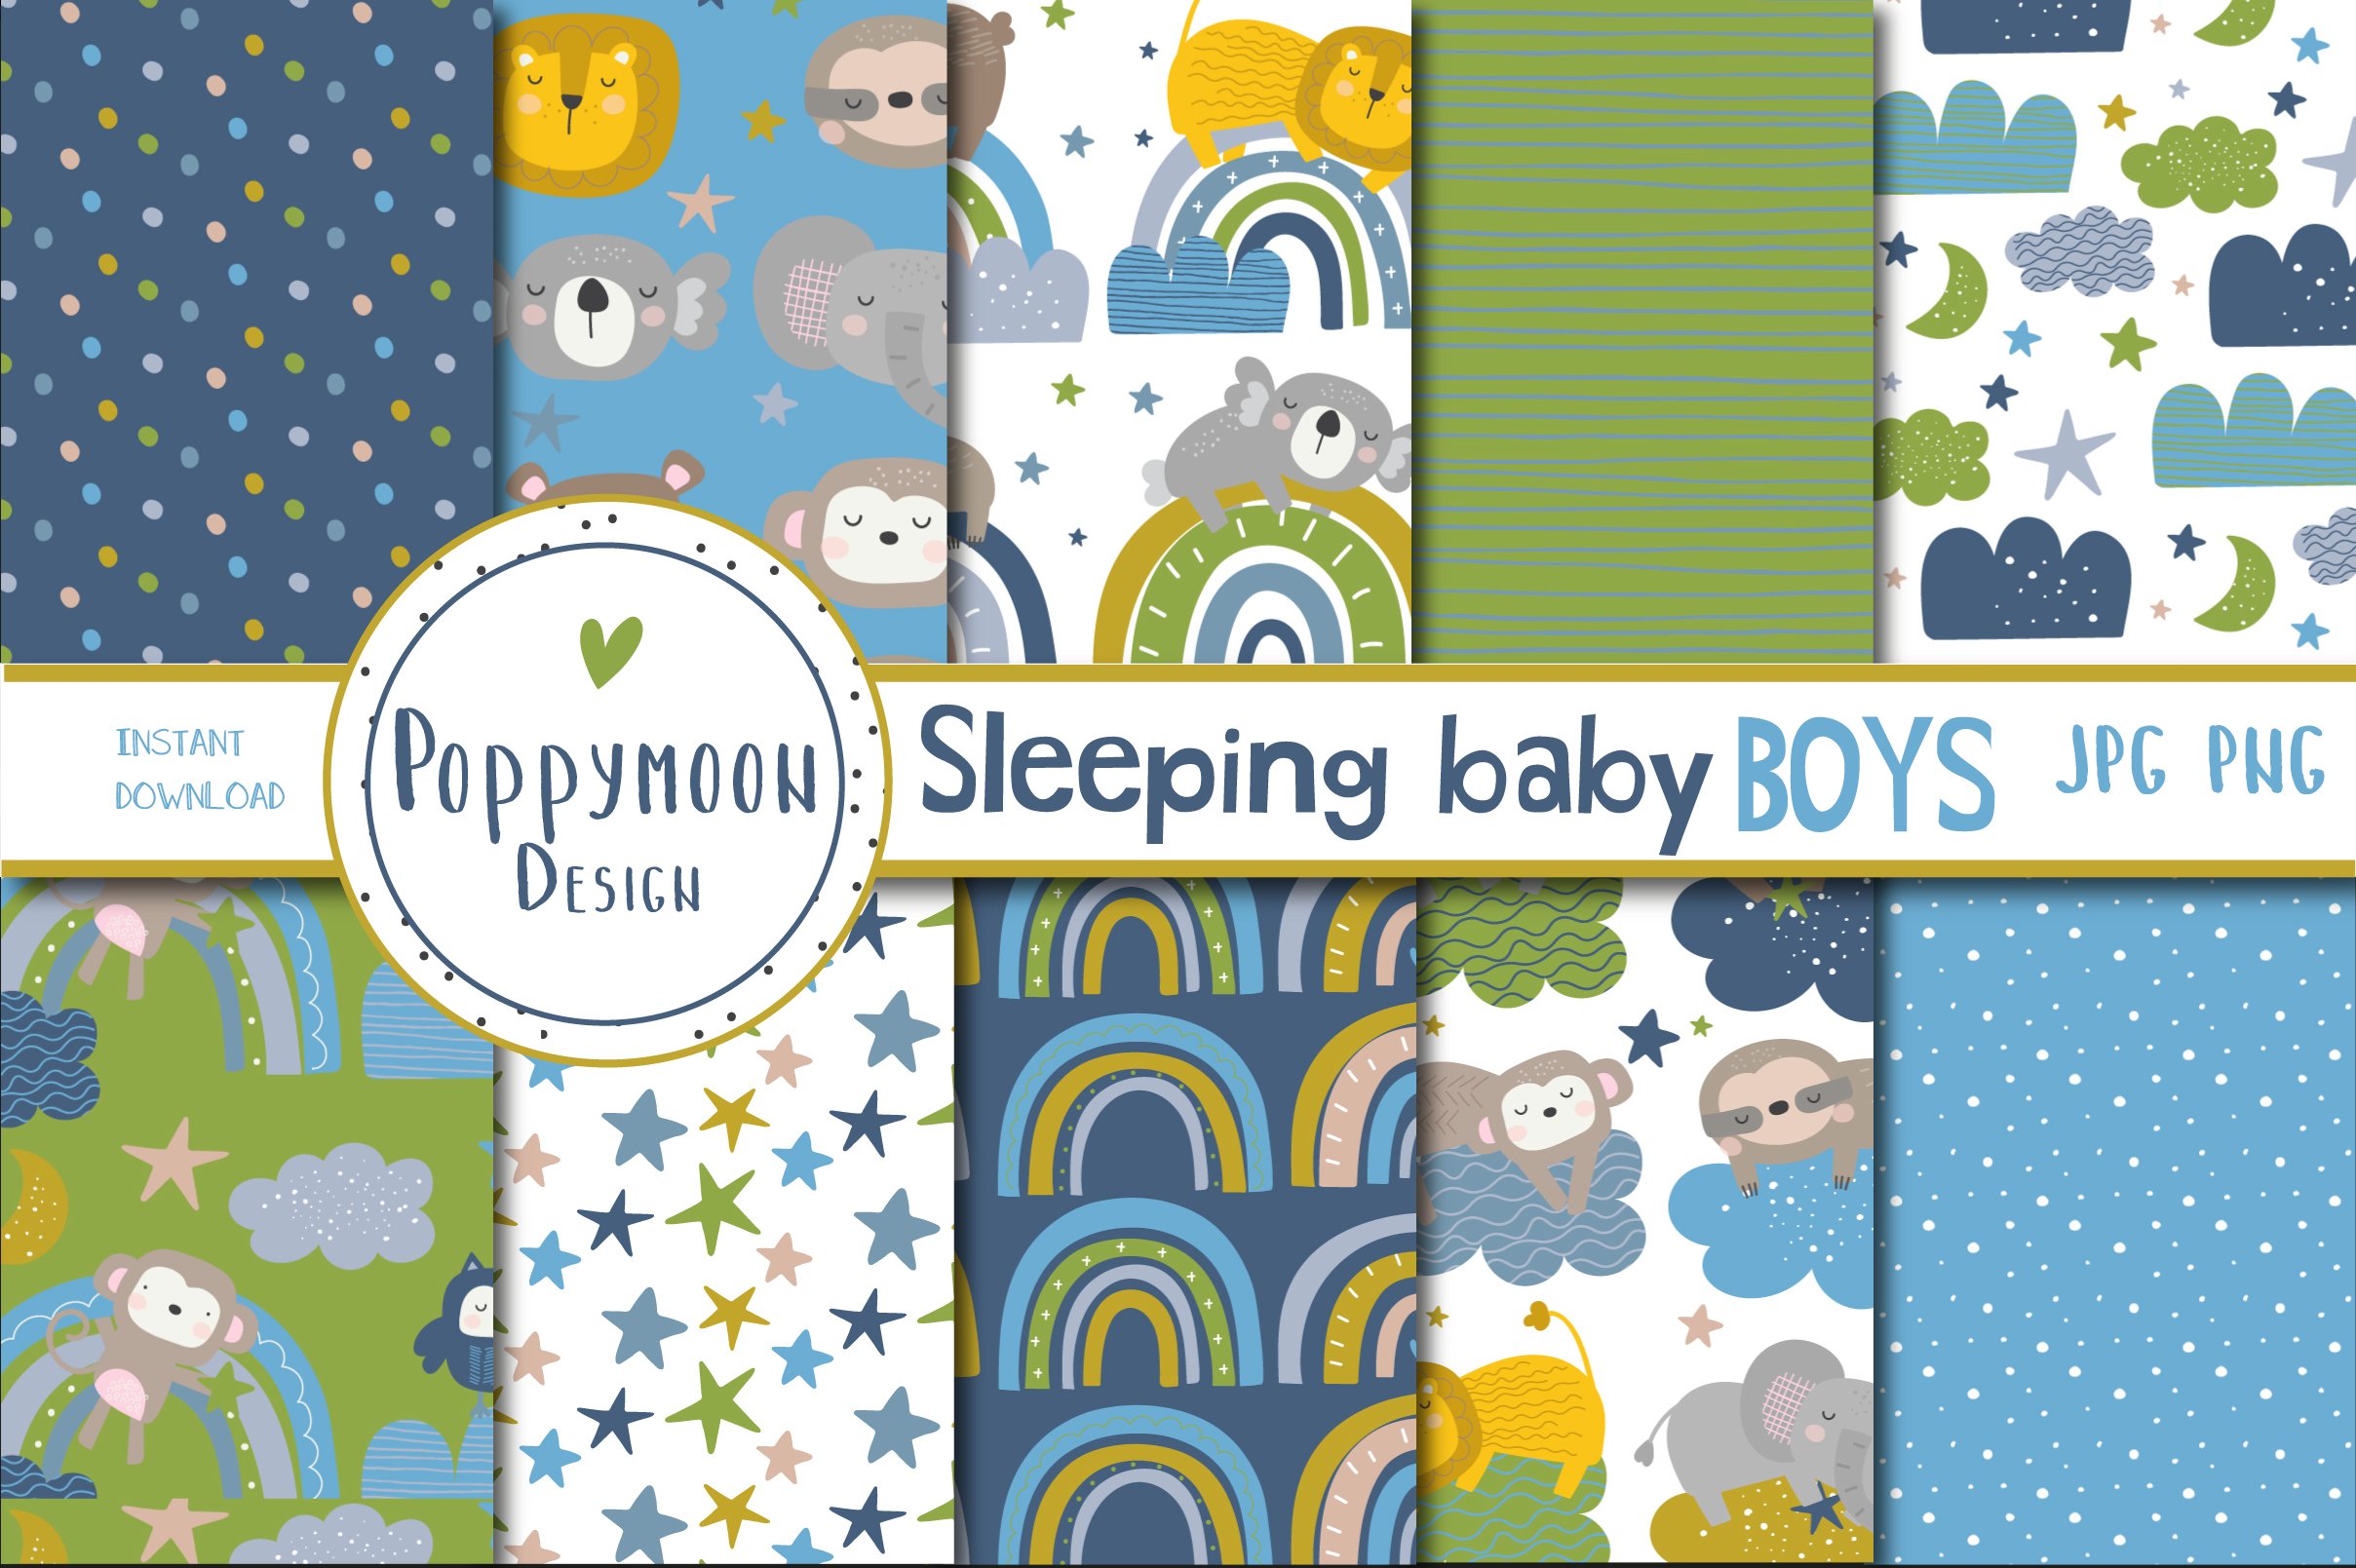 Sleeping Baby Boys paper cover image.